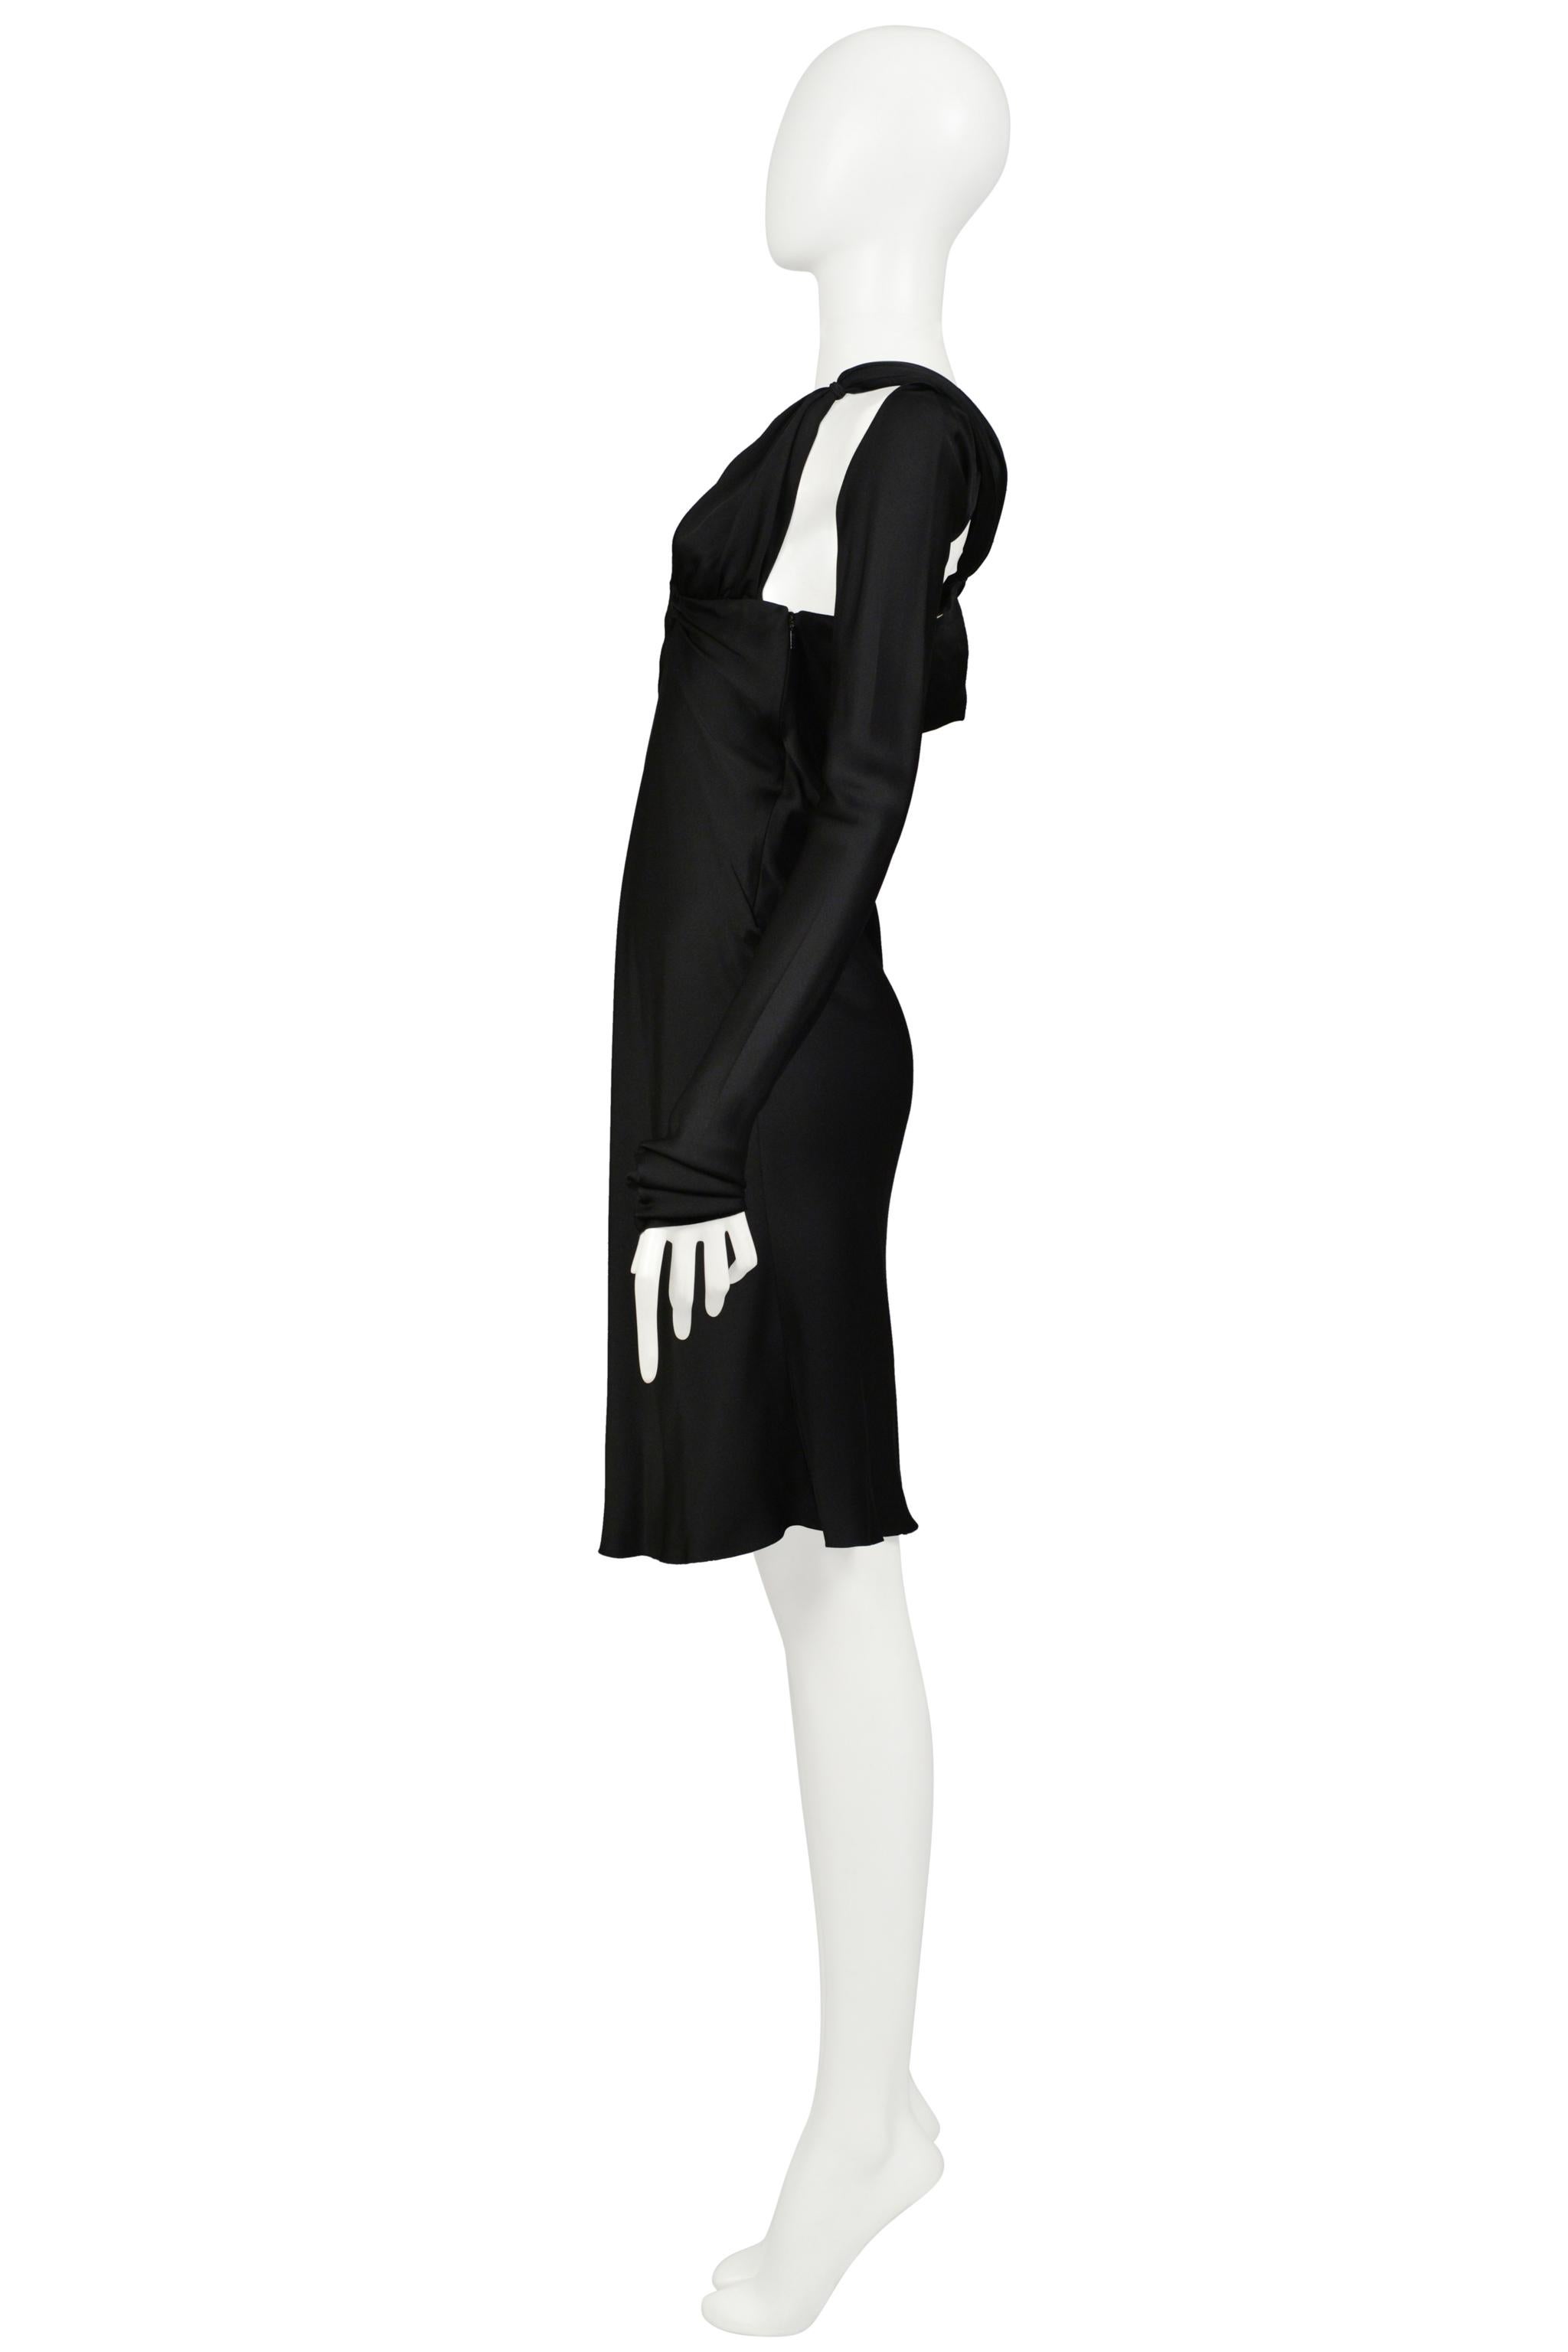 Gucci By Tom Ford Black Cutout Halter Dress With Attached Sleeves 2002 1